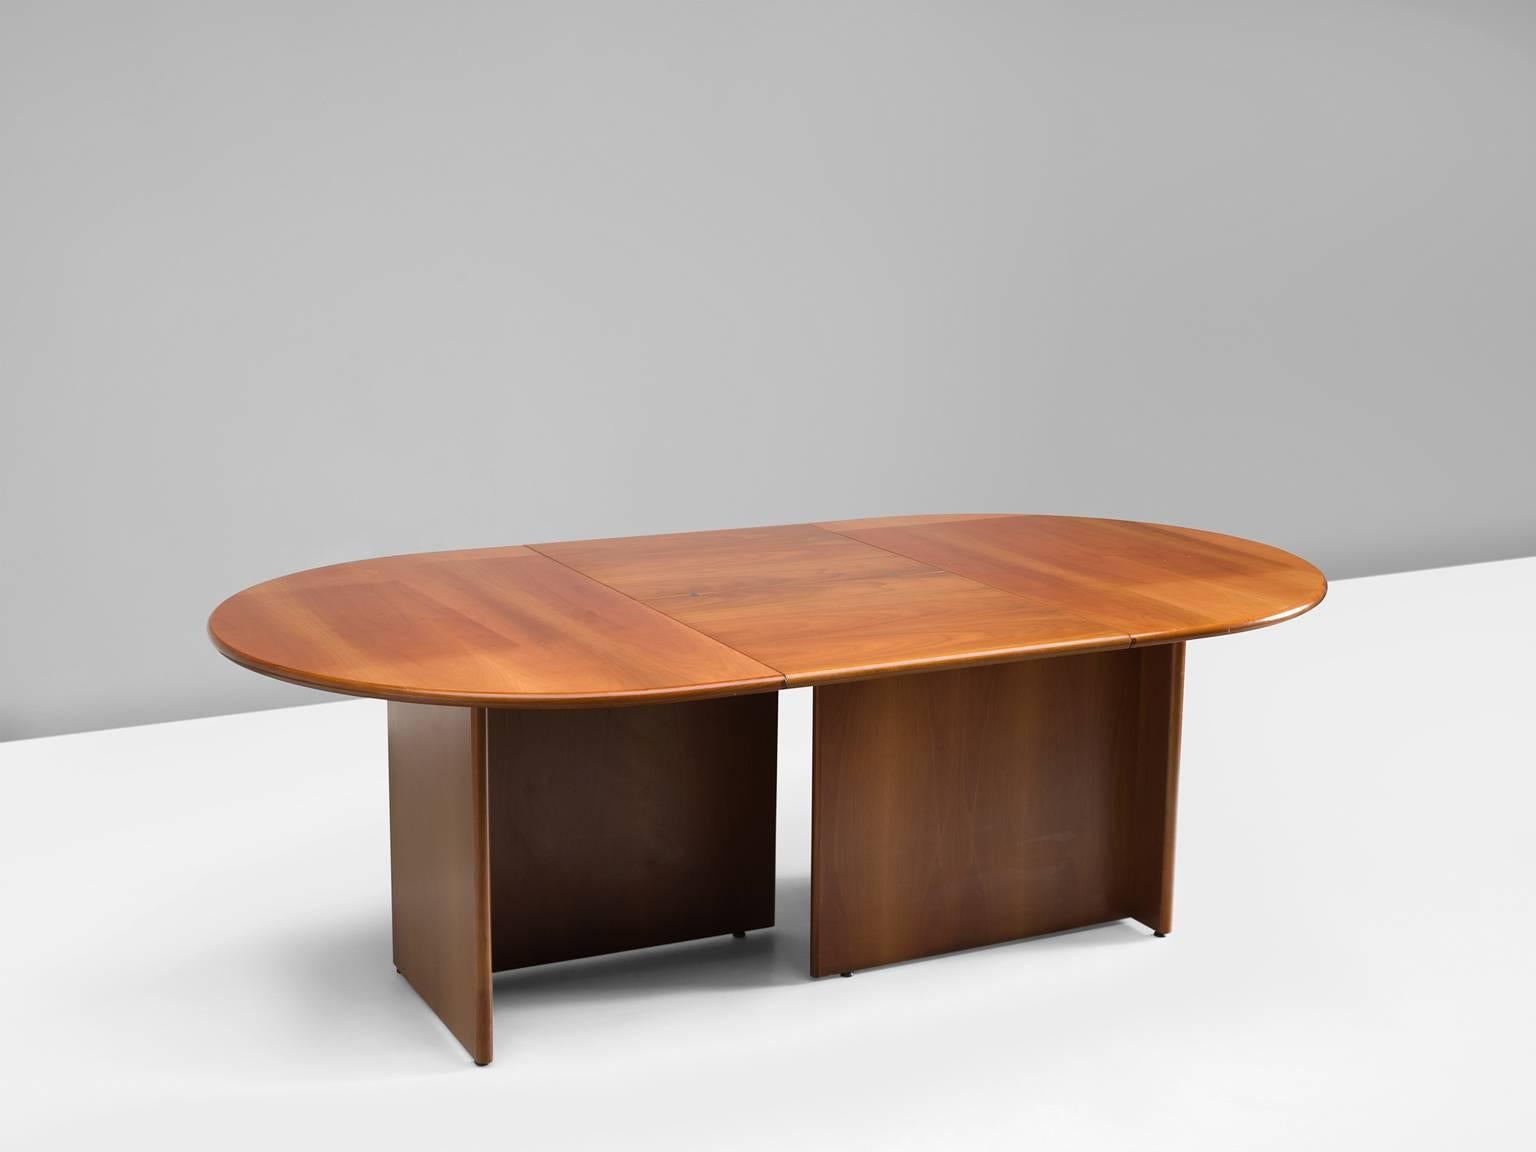 Dining table, walnut, Italy, 1950s.

This table is executed in Italian walnut. The top is oval whereas the base exists of two separate angles that together form an open rectangle. These angles can be put together and the top can be made smaller,